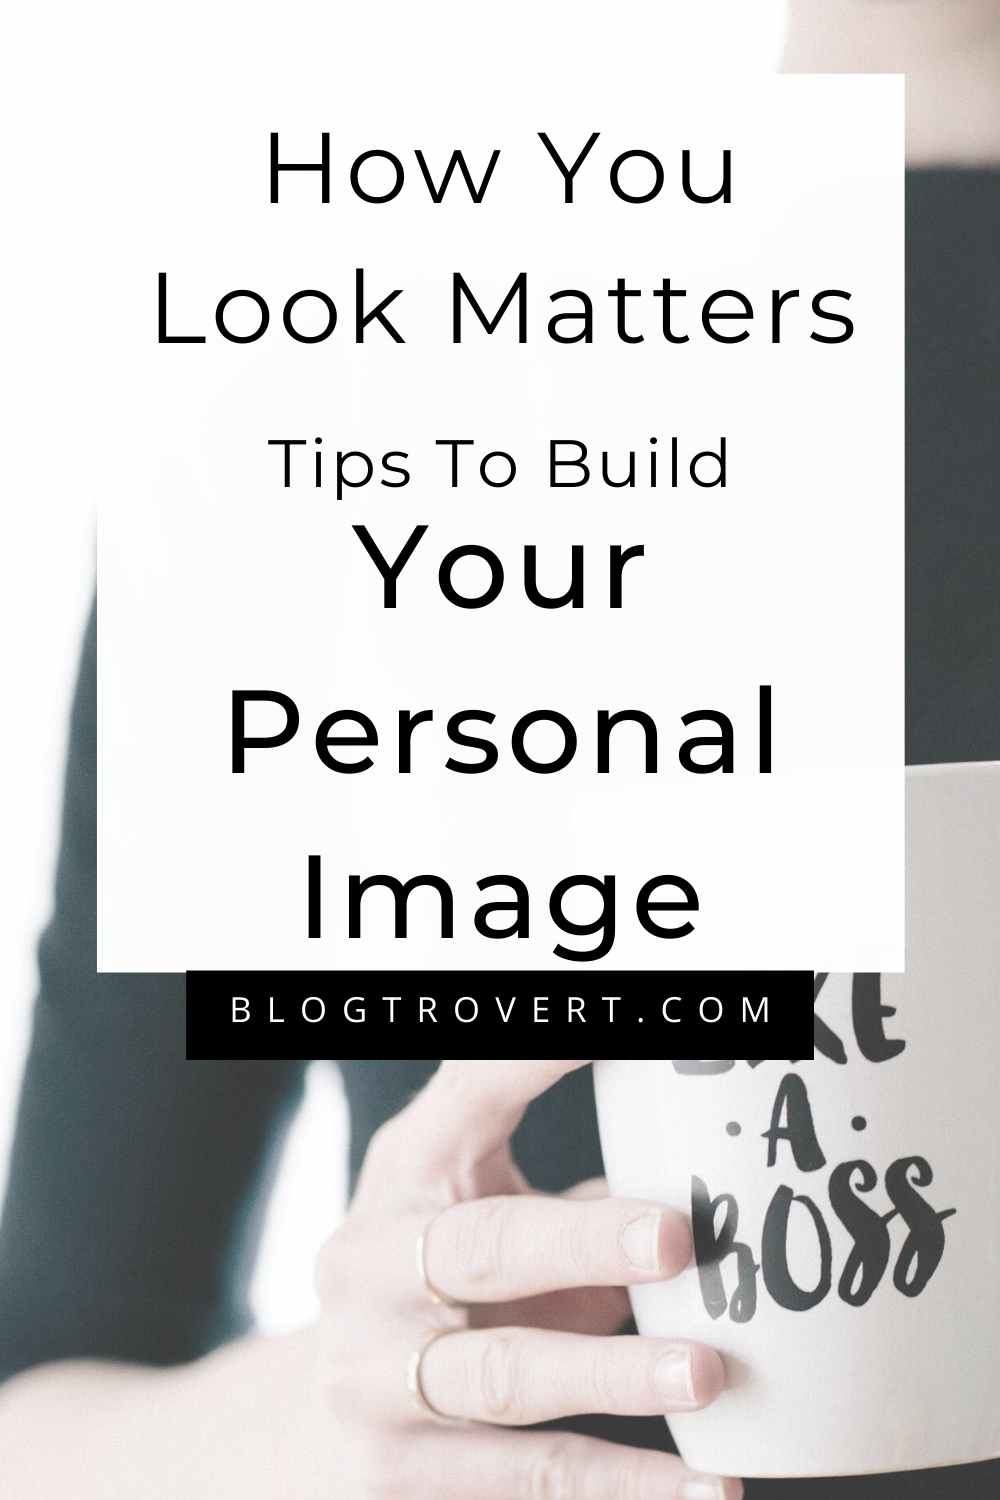 How To Build Your Personal Image; 6 Helpful Steps 1